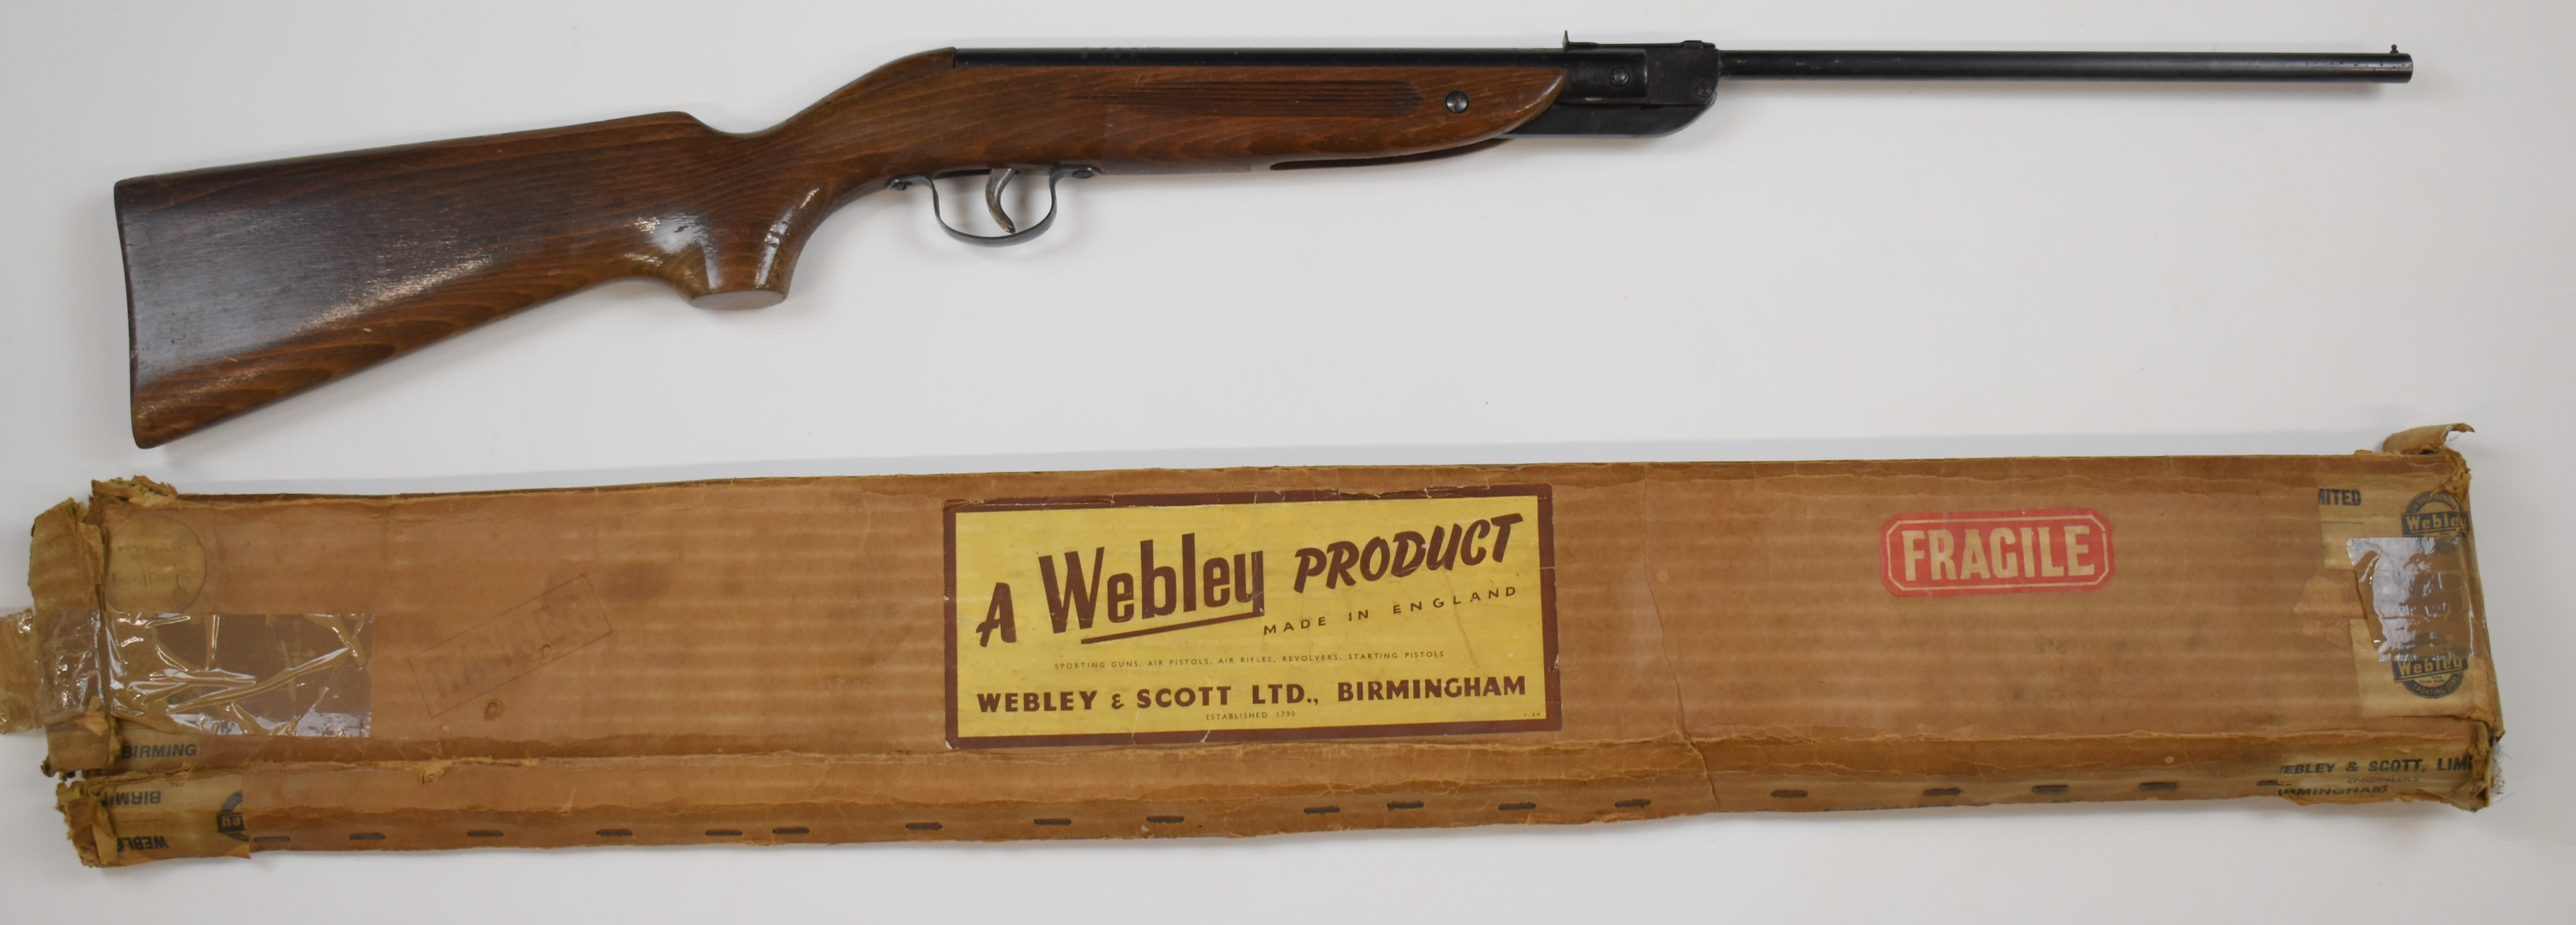 Webley Ranger .177 air rifle with semi-pistol grip and adjustable sights, NVSN, in original box. - Image 2 of 8